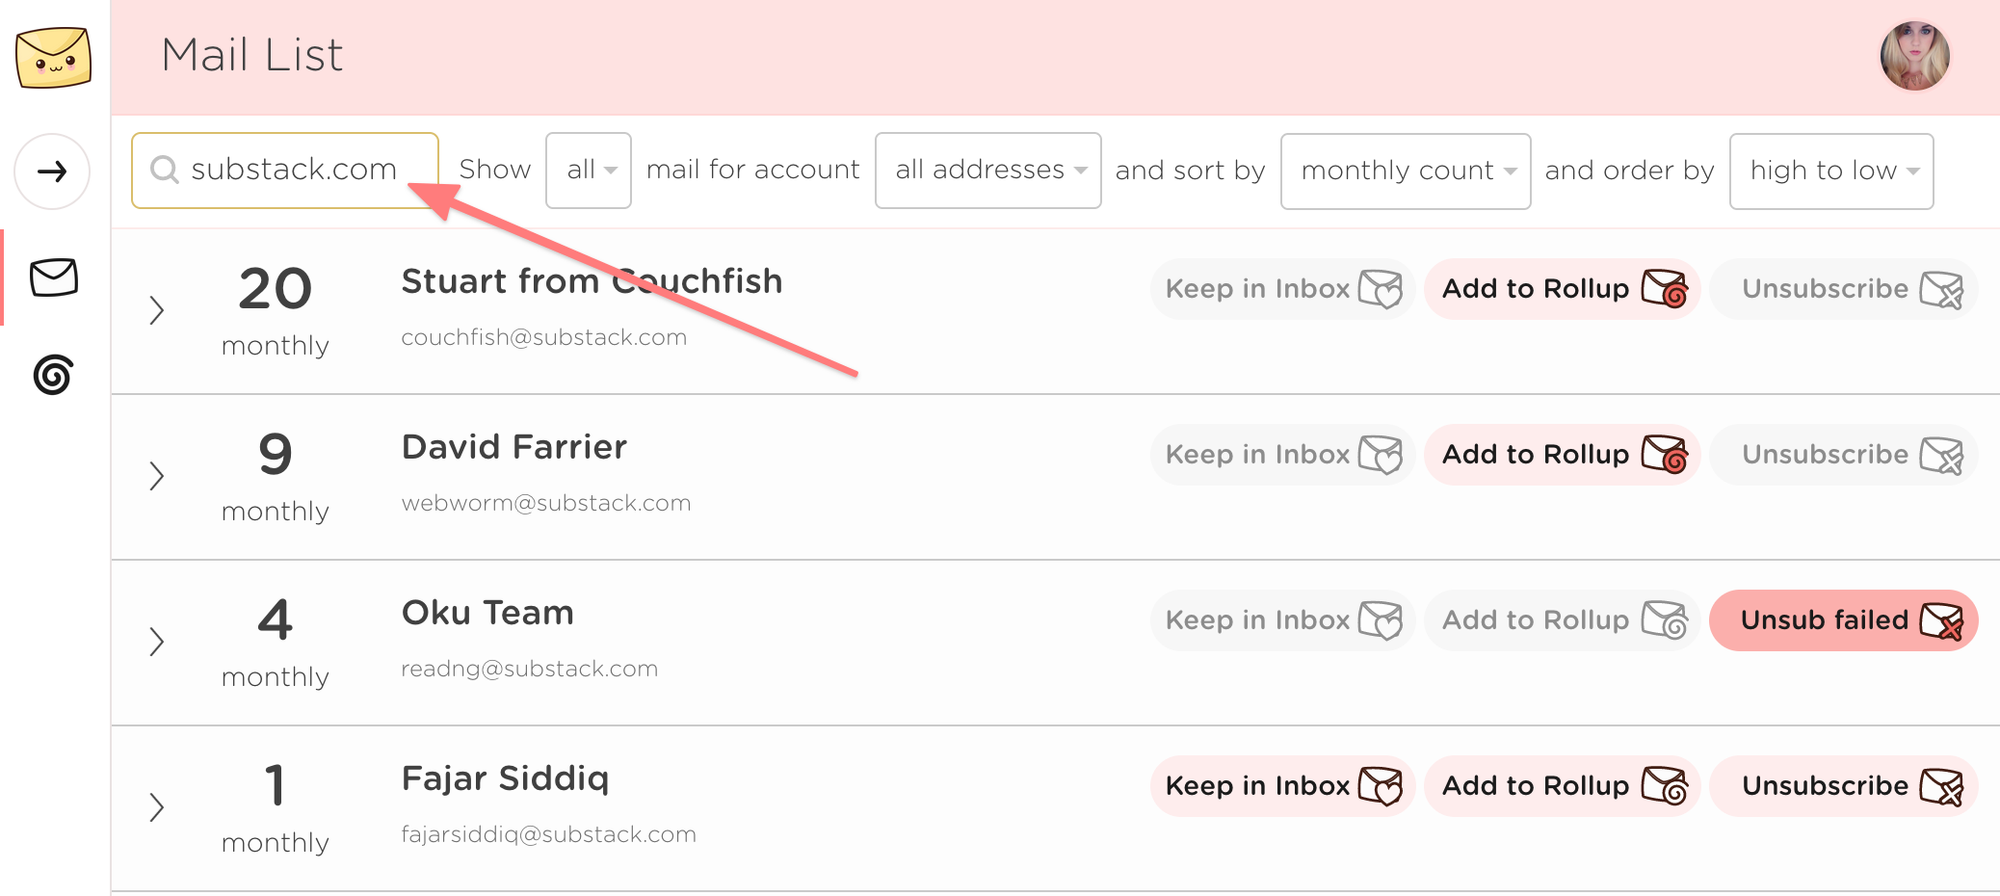 Search the Mail List for emails by email address